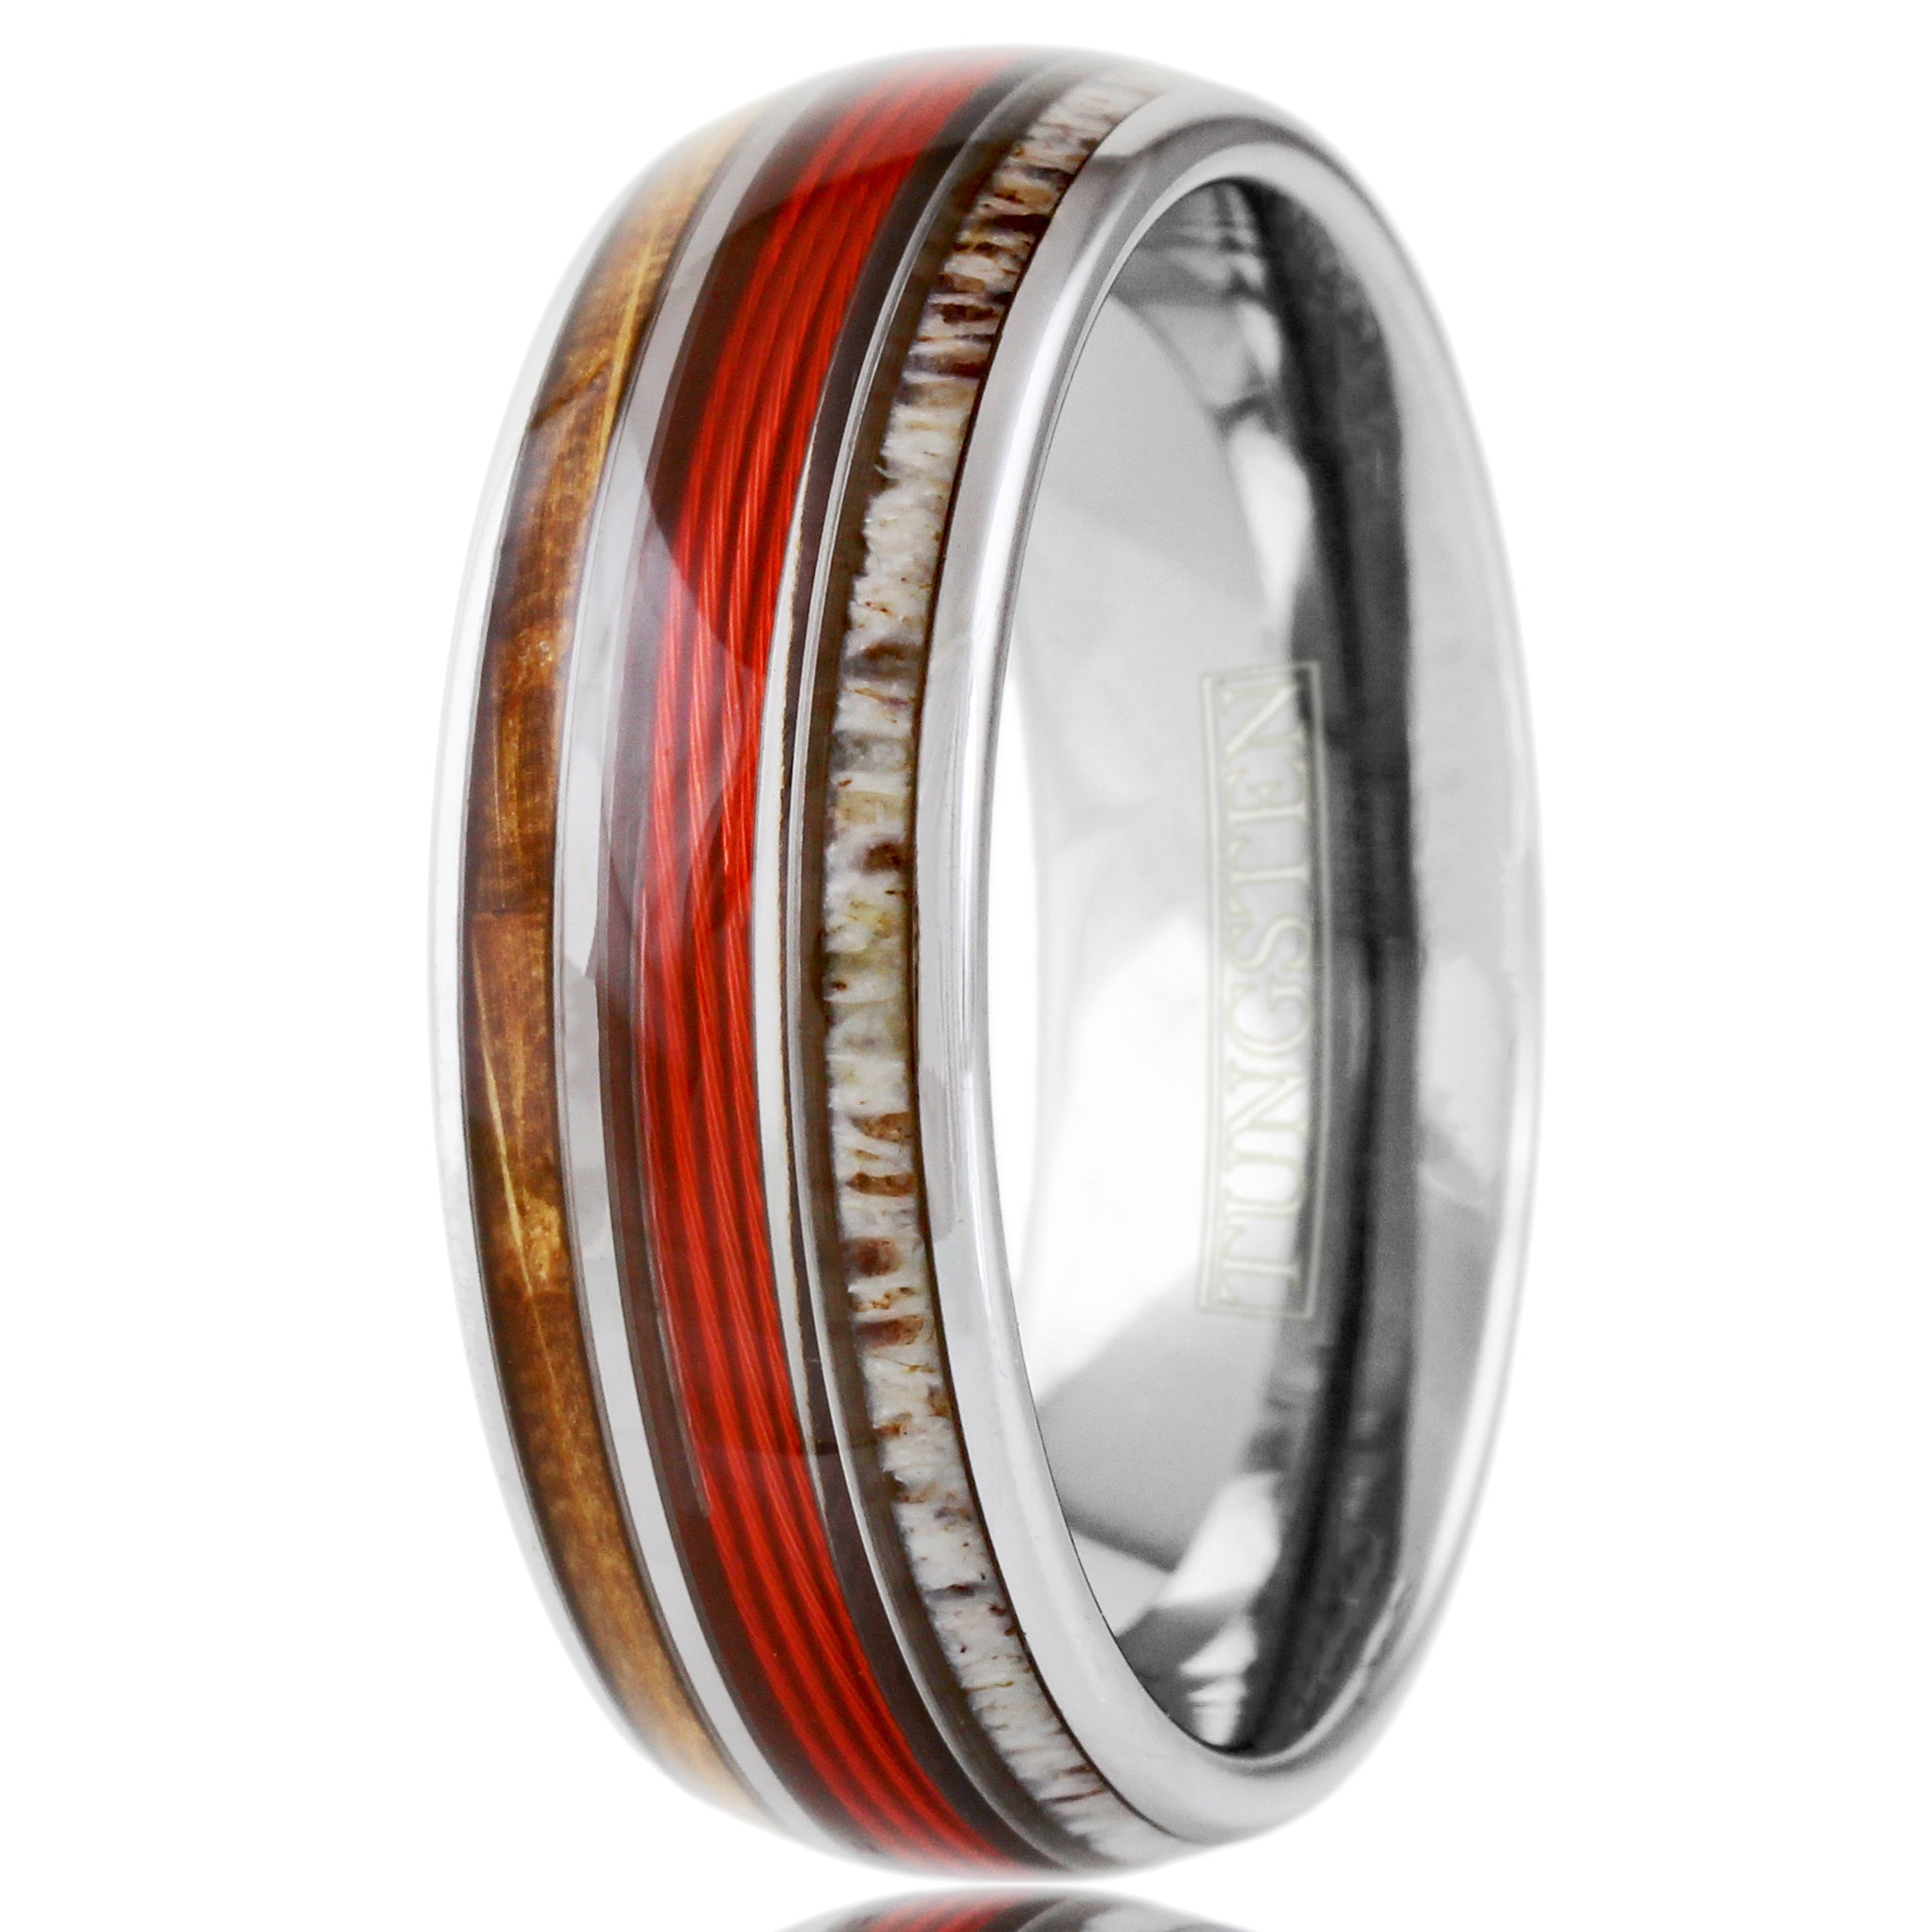 Polished Silver Low Dome Tungsten Band Ring w/ Red Fishing Line Inlay 